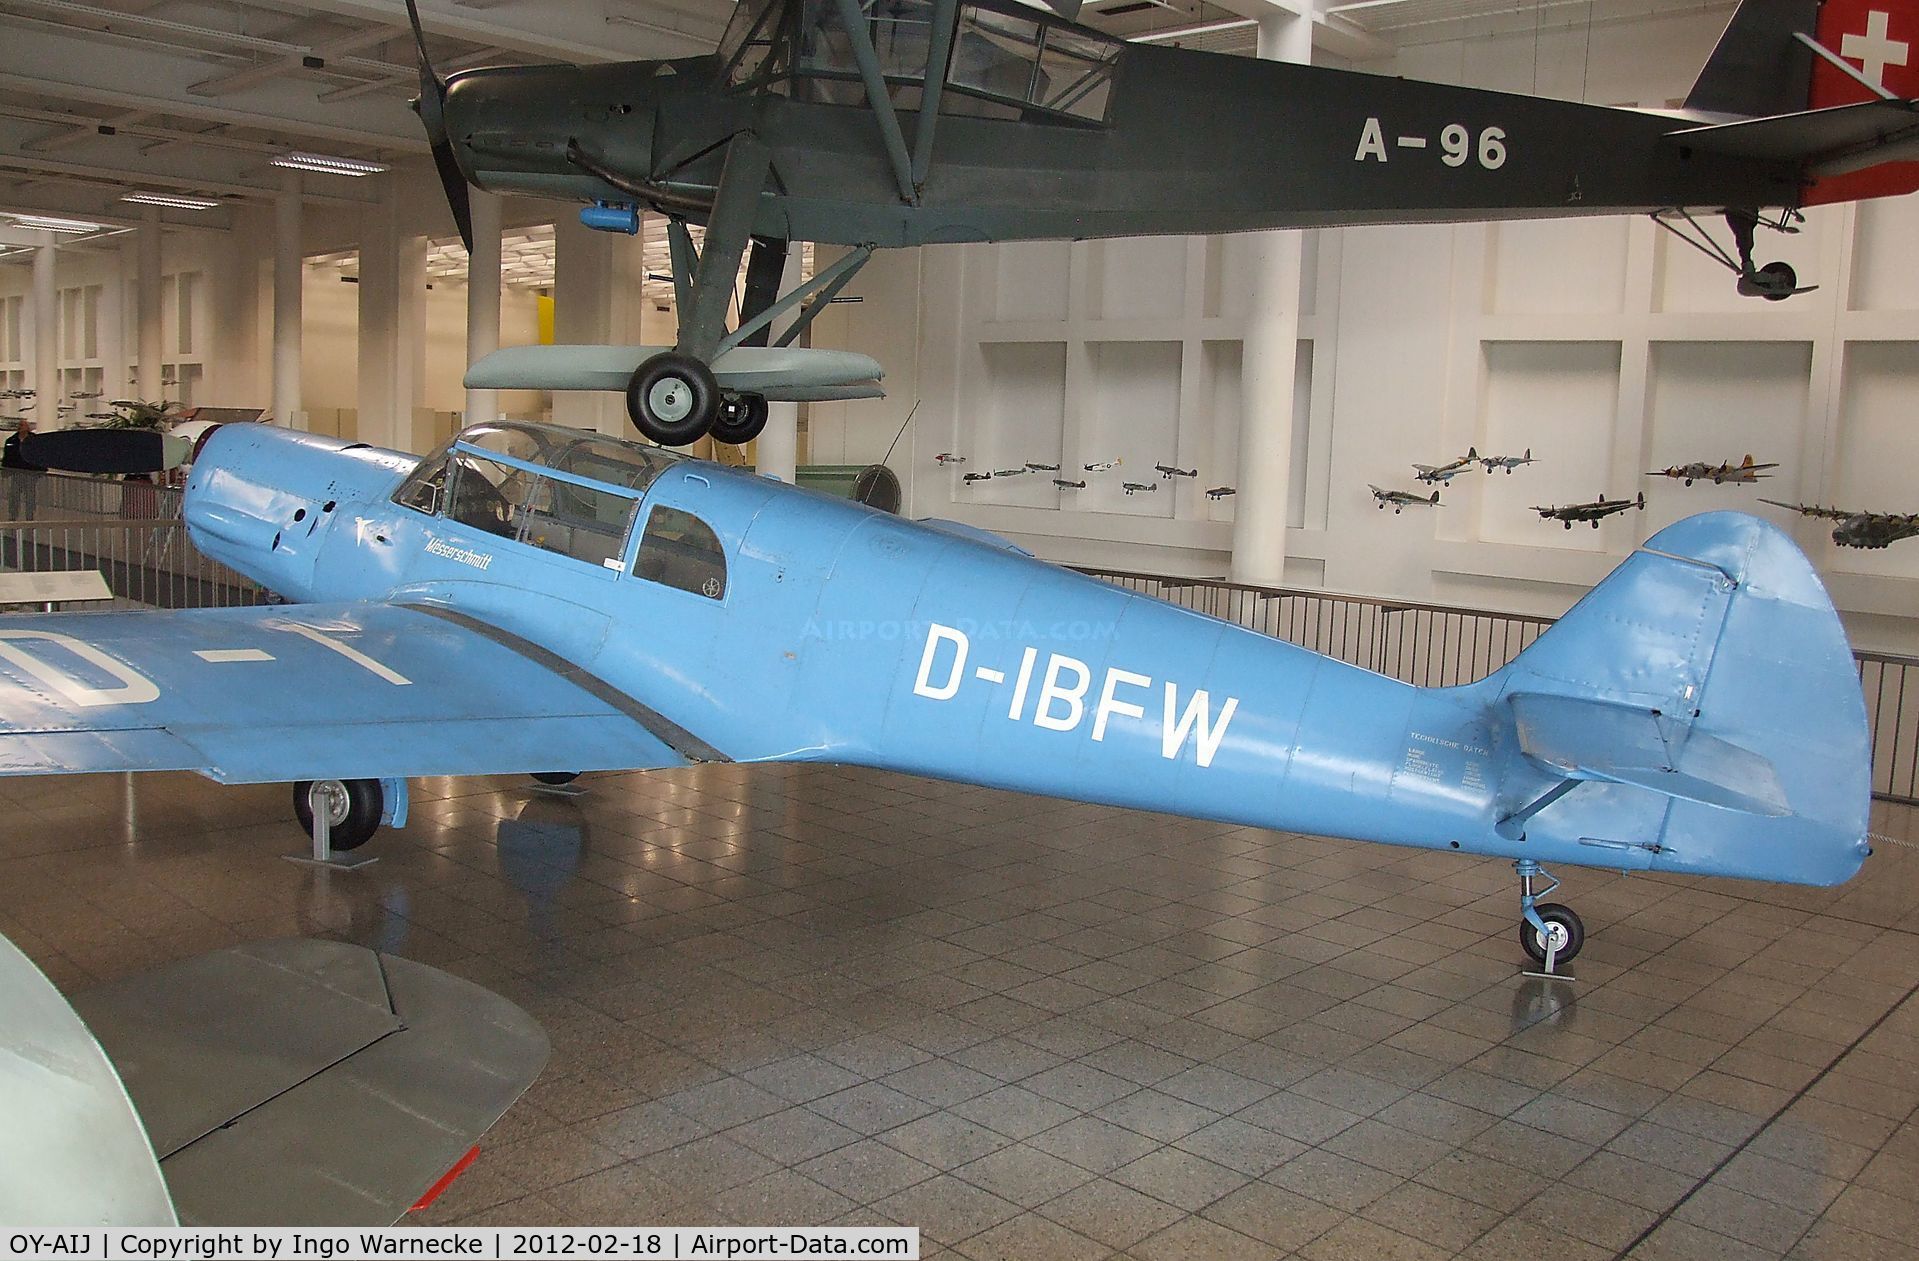 OY-AIJ, Nord 1002 Pingouin II C/N 877, Nord 1002, re-converted with Argus engine to Bf 108 and displayed as 'D-IBFW' at the Deutsches Museum, München (Munich)